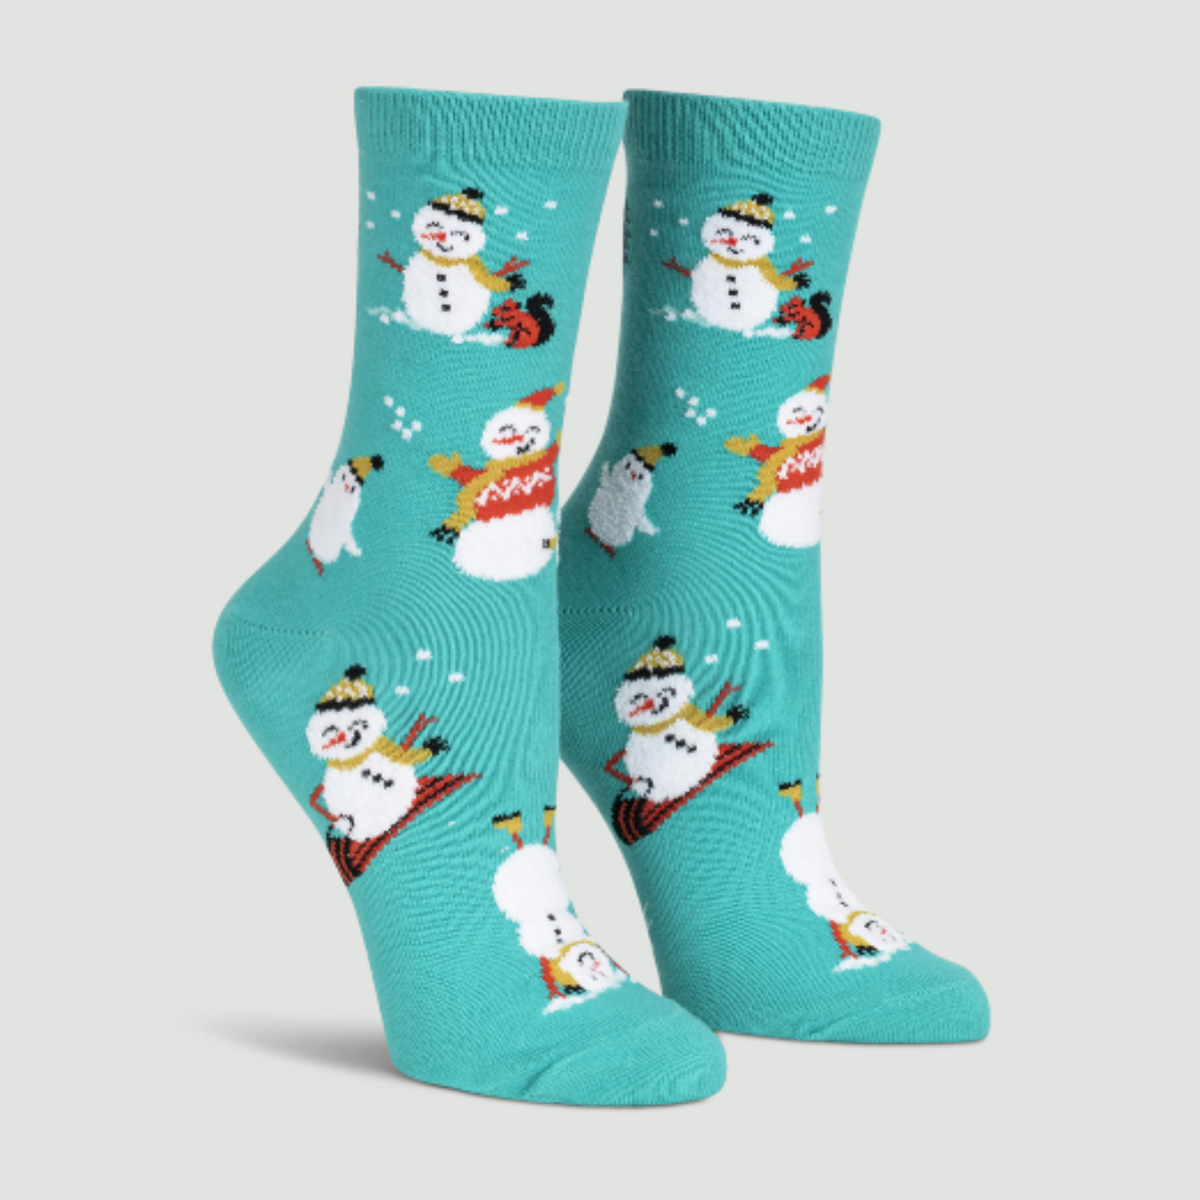 Sock It To Me Having Snow Much Fun women&#39;s crew sock featuring teal sock with smiling snowmen and white cat all over. Shown on display feet. 